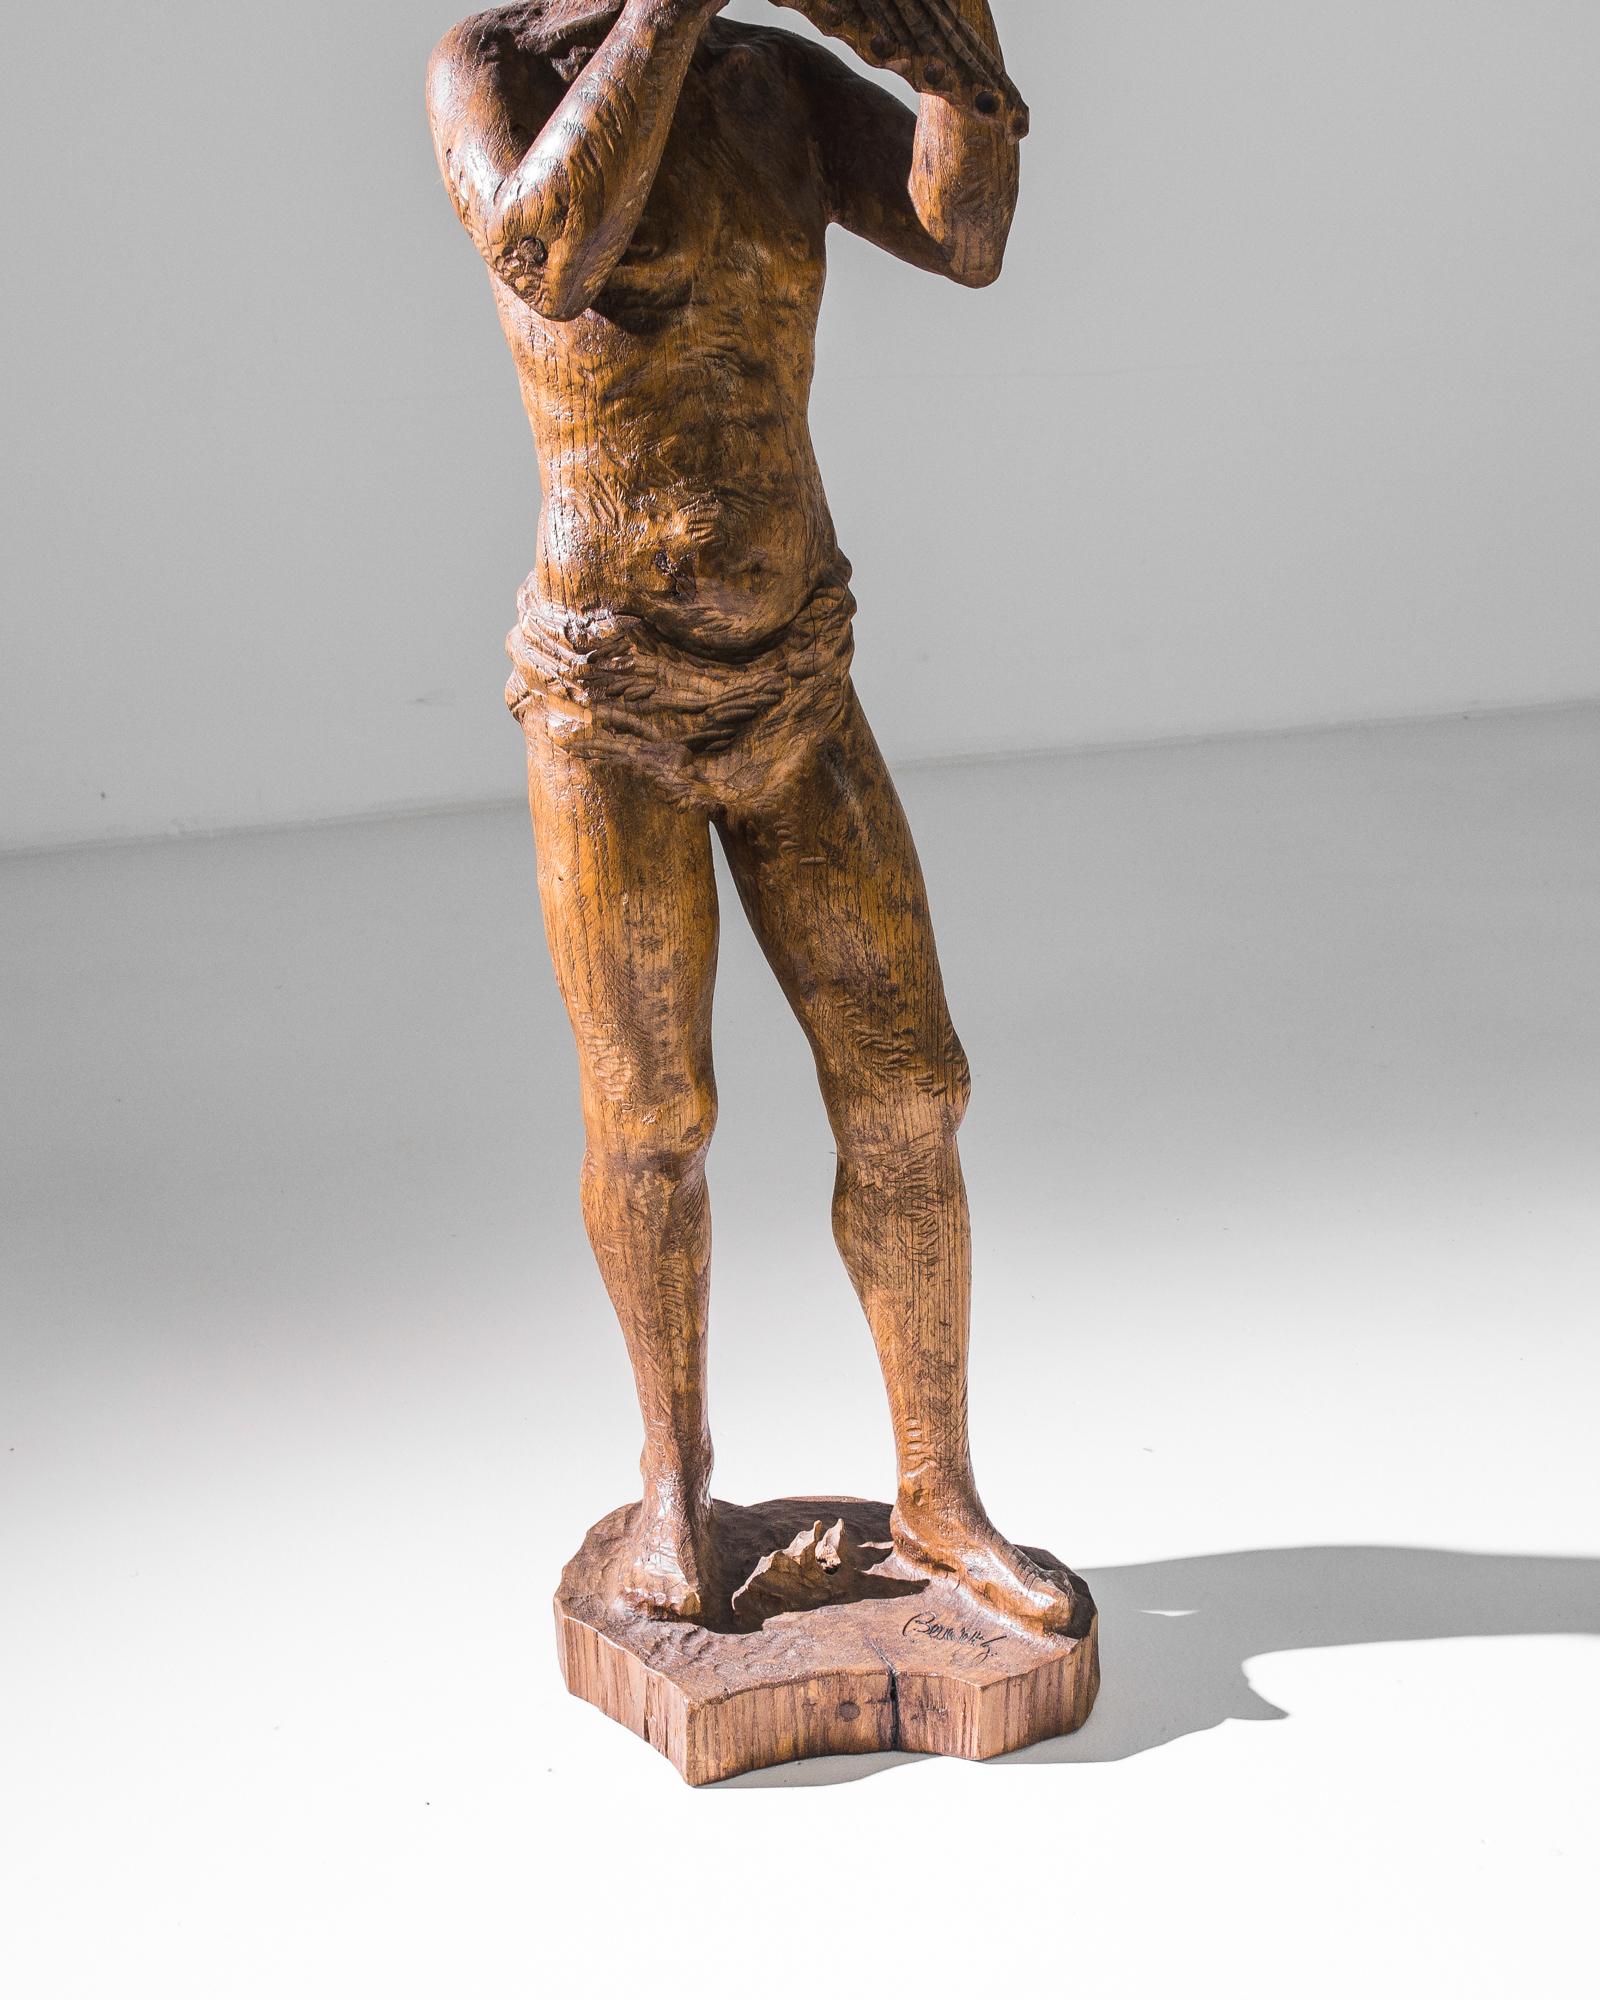 This wooden sculpture with a glossy patina was made in Belgium, circa 1970. It depicts a standing figure playing the pan flute, staring dreamily into the distance. The skillful carving can be appreciated in the details of the character’s hair curls